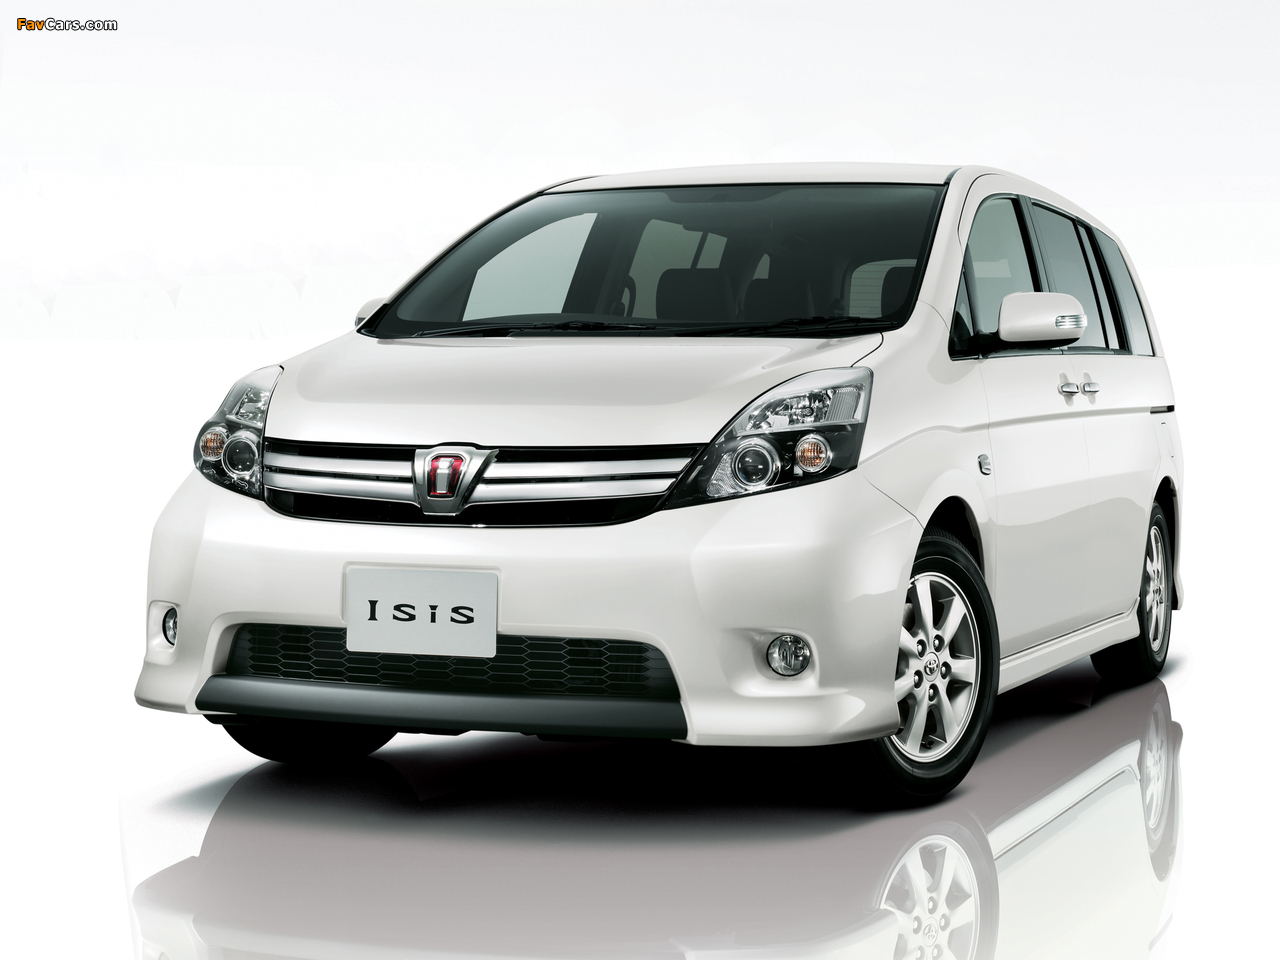 Toyota Isis Platana V Selection White Package 2011 photos (1280 x 960)